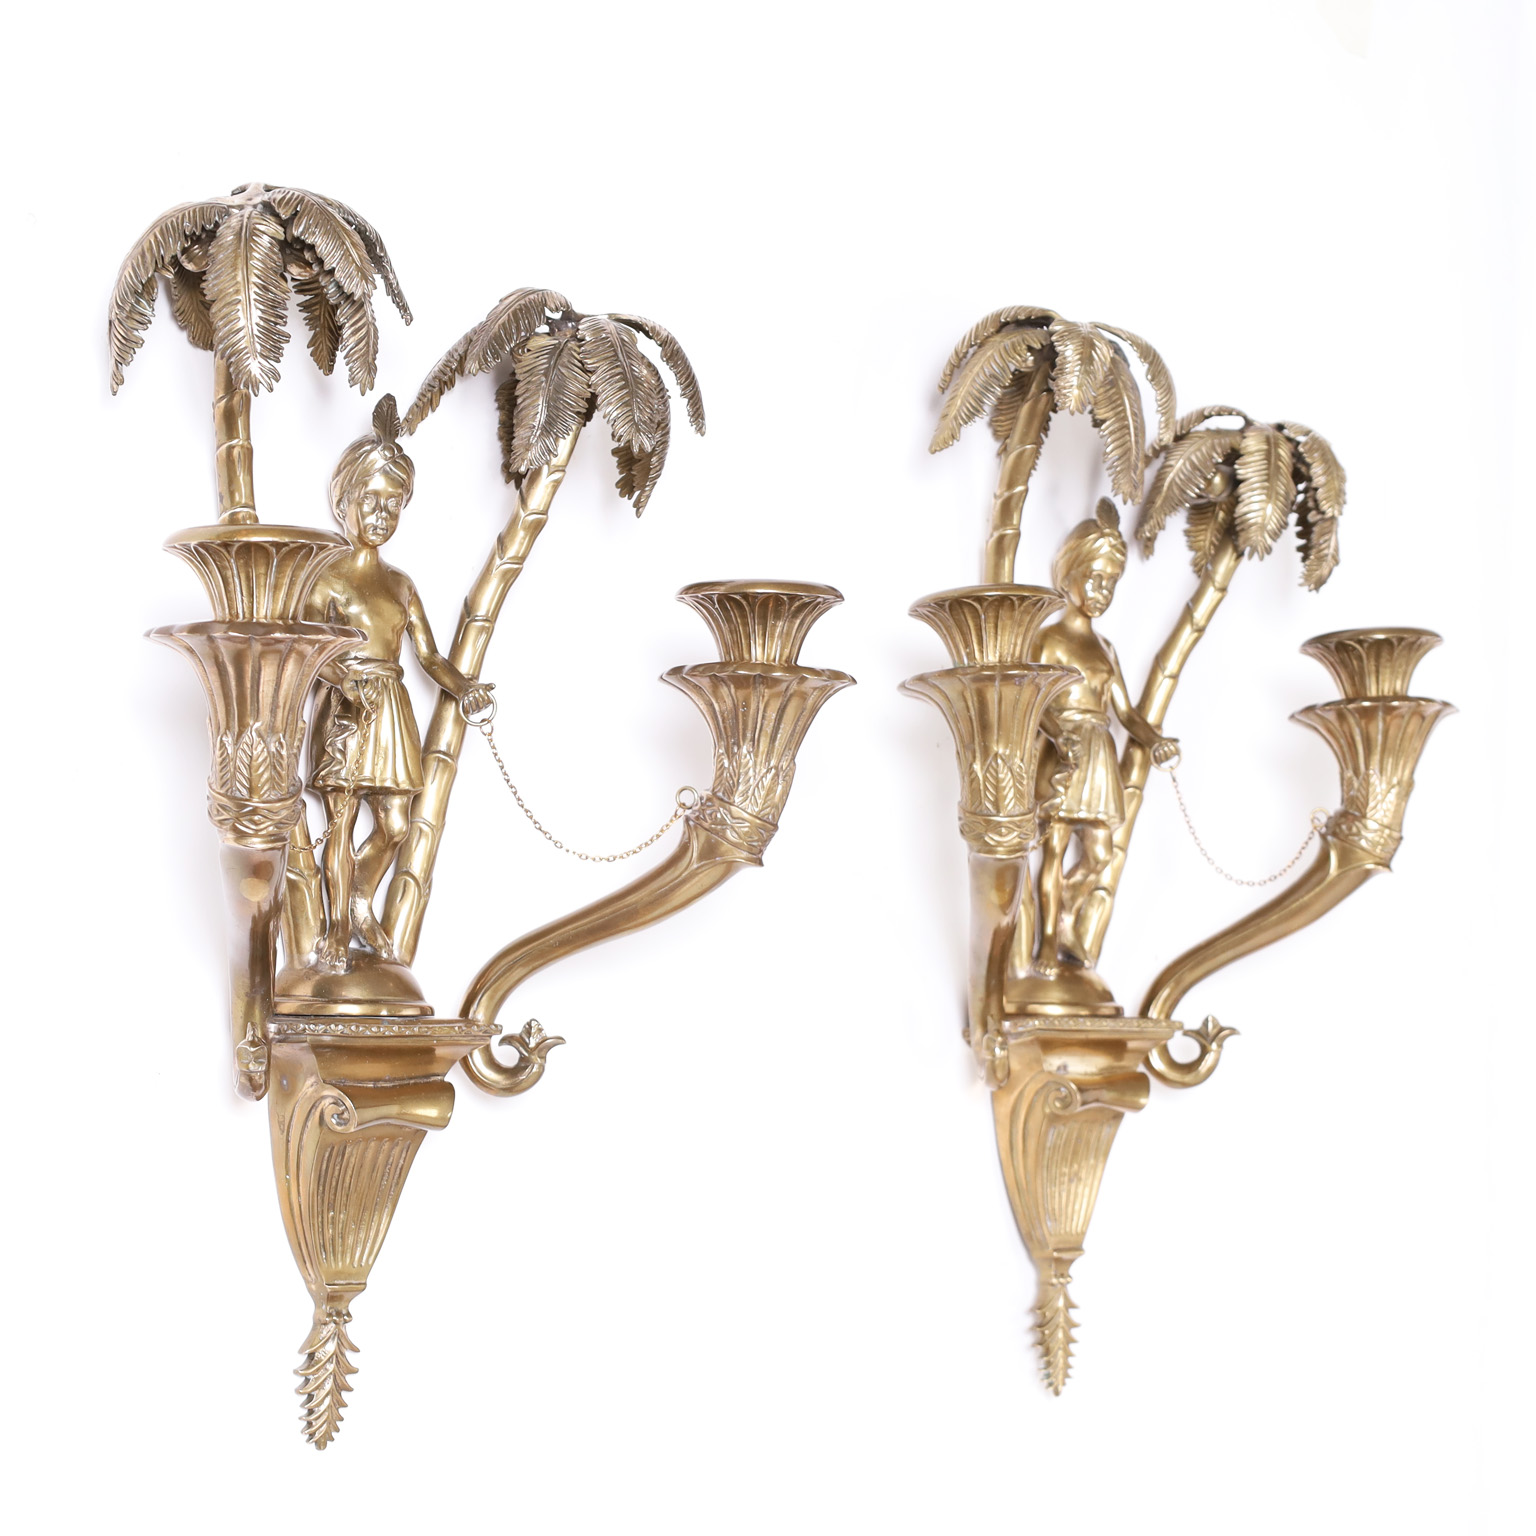 Antique French Orientalist Figural Wall Sconces with Palm Trees